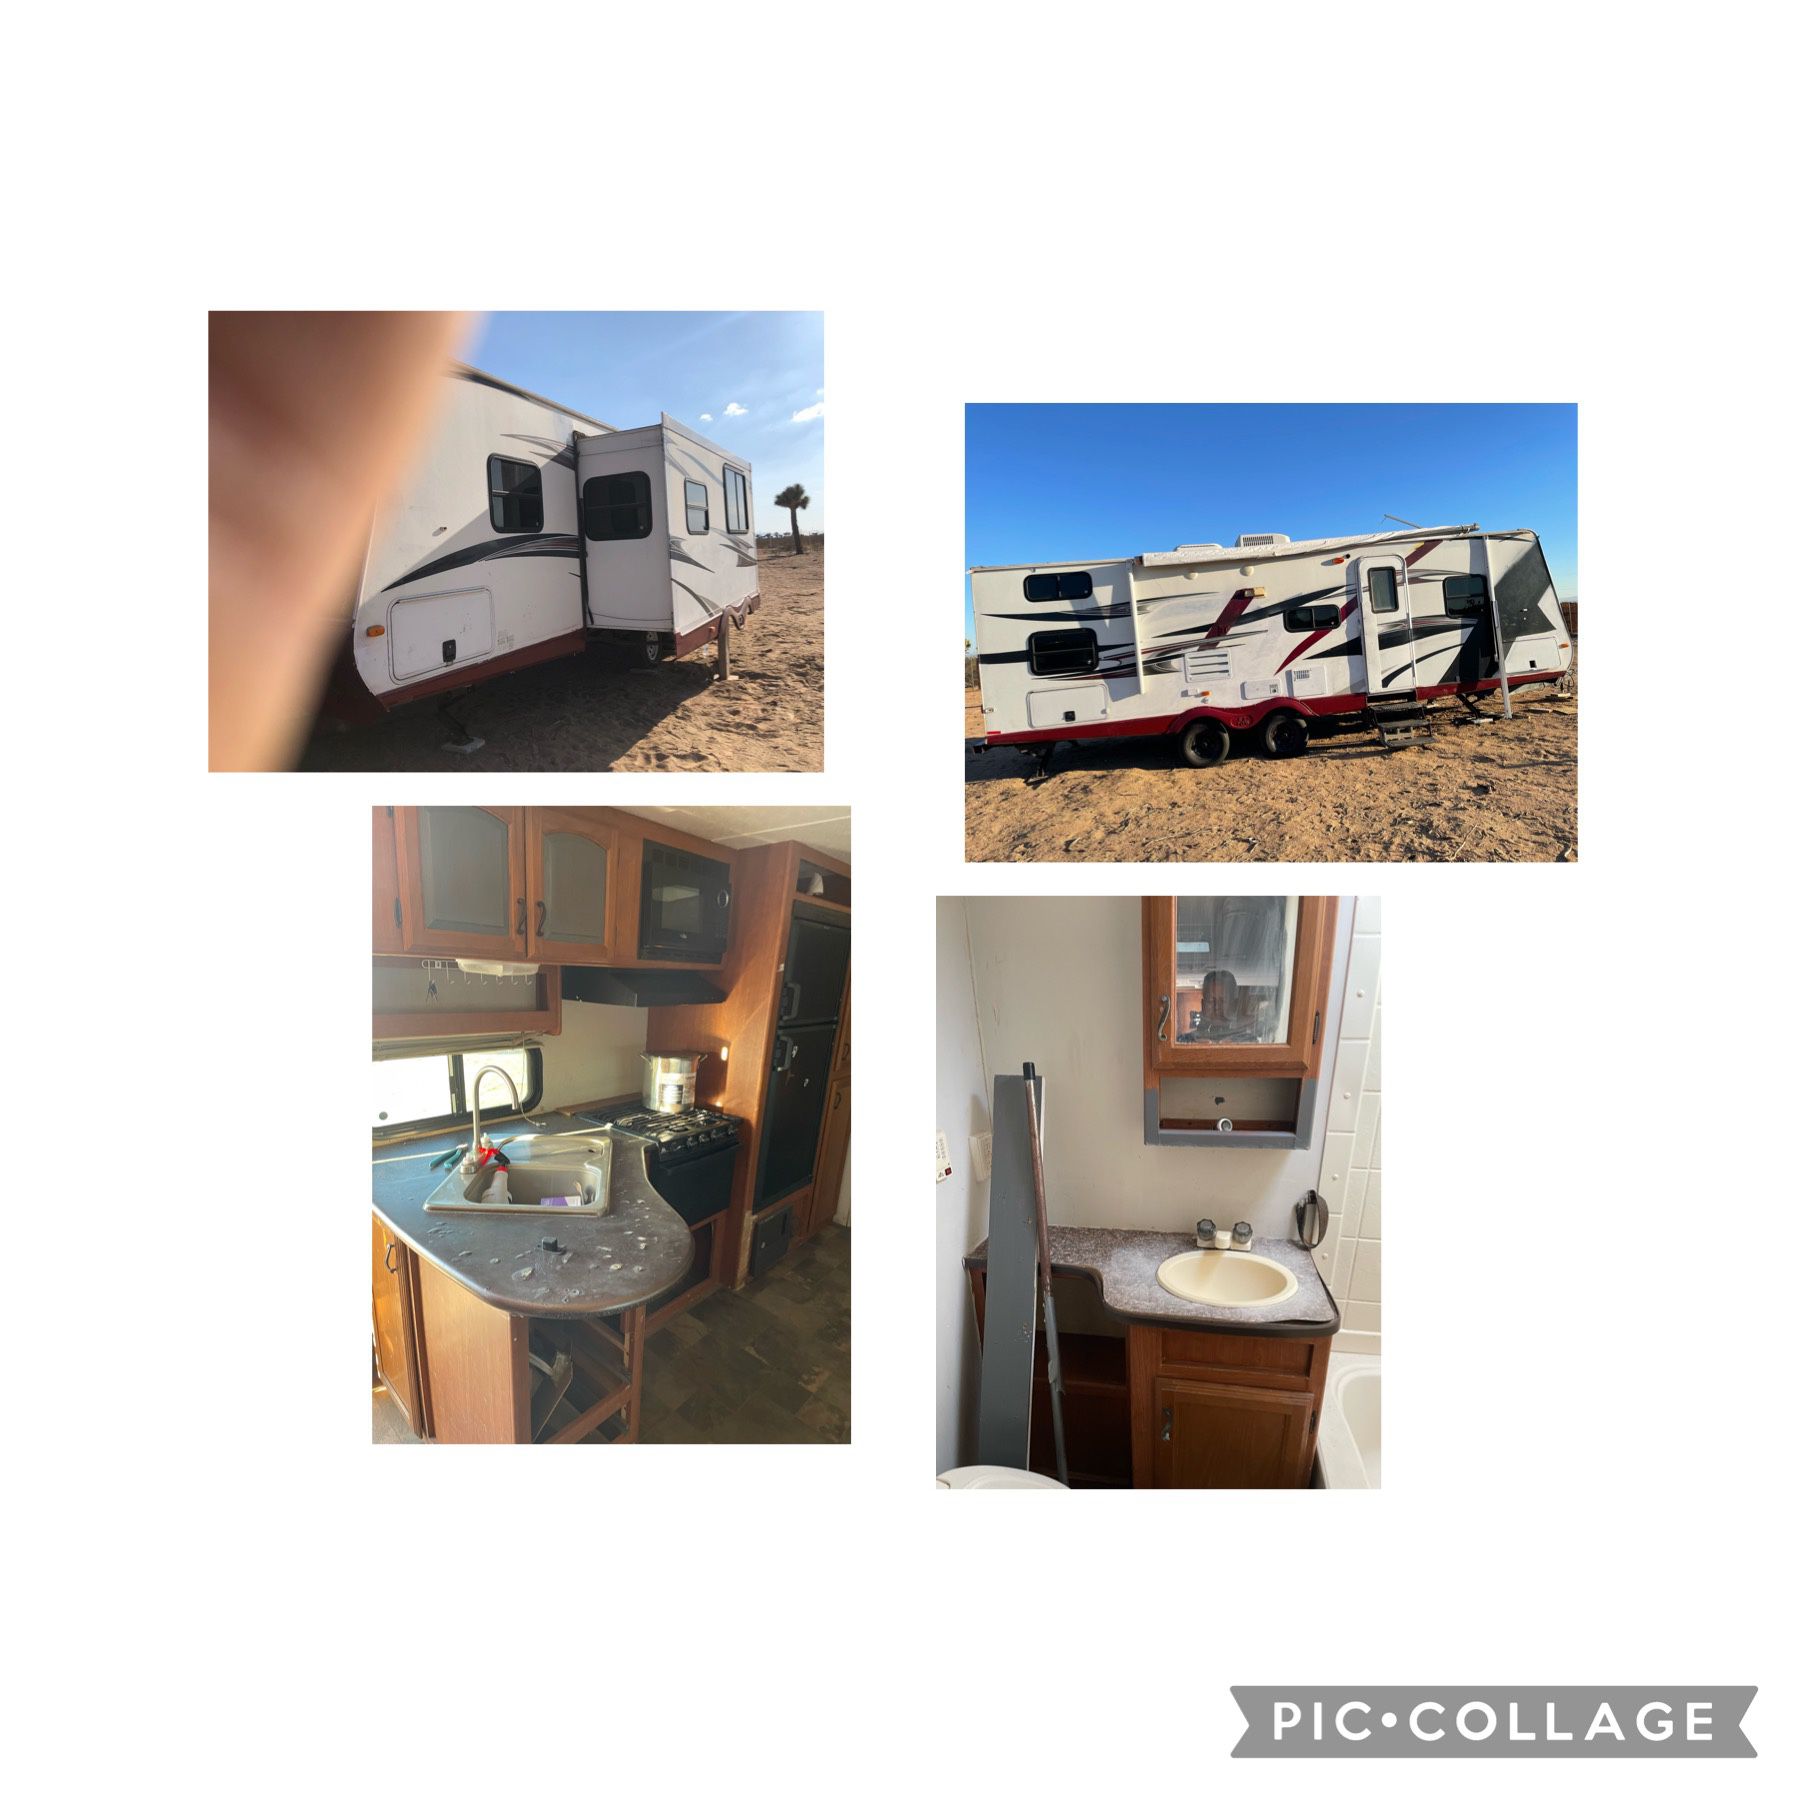 2012 Fores River Rv - 1989 Motorhome  (Send Your Offer)